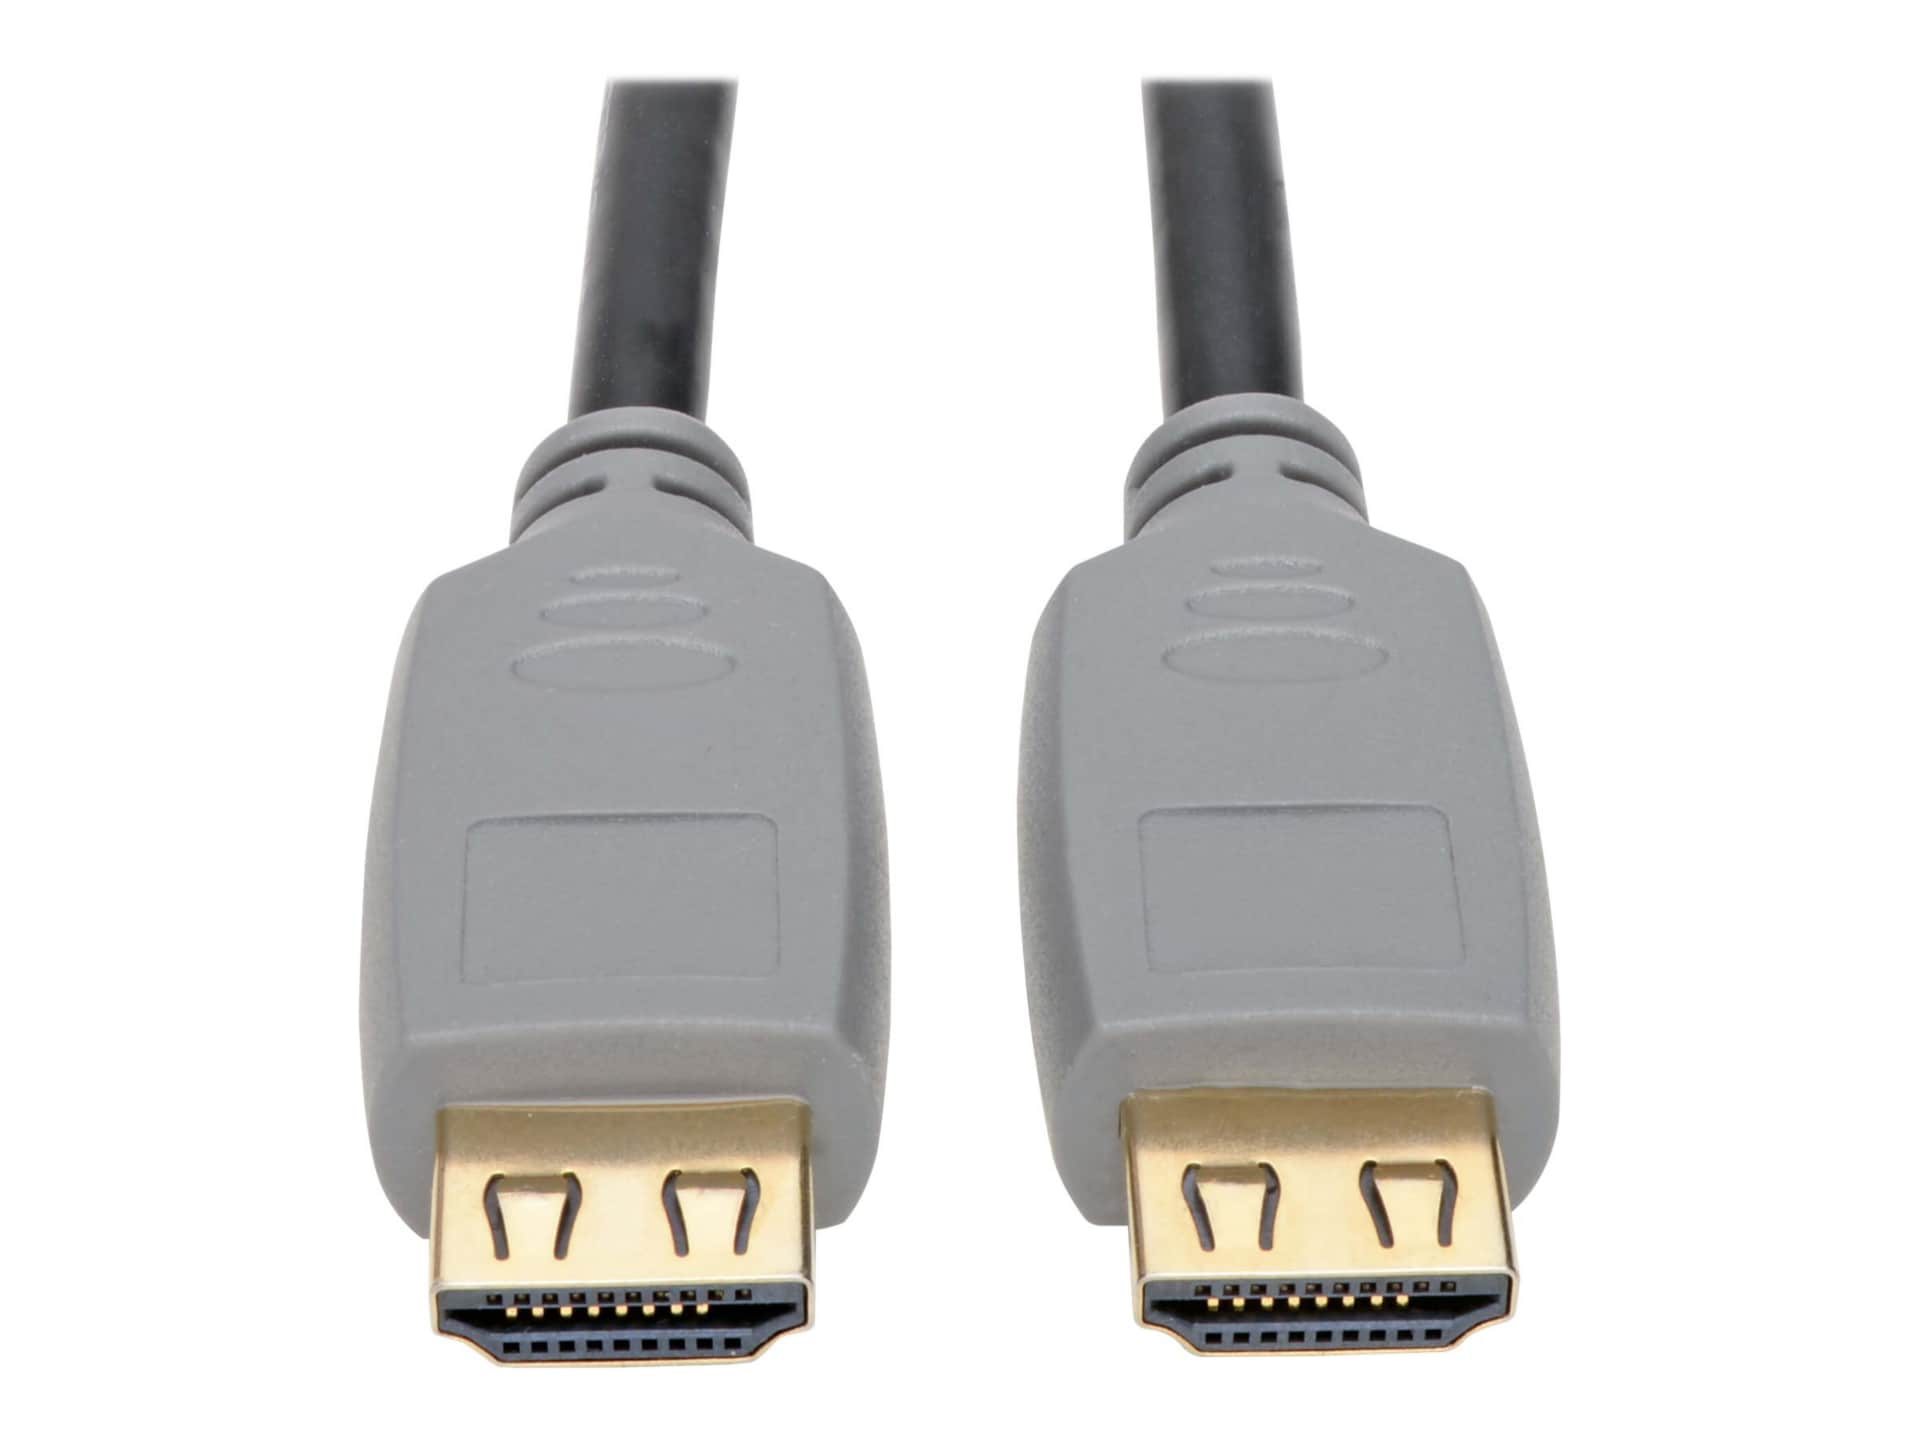 Tripp Lite High-Speed HDMI Cable with Gripping Connectors 4K 60 Hz 4:4:4 M/M  Black 3ft - HDMI cable - 3 ft - P568-003-2A - Audio & Video Cables 